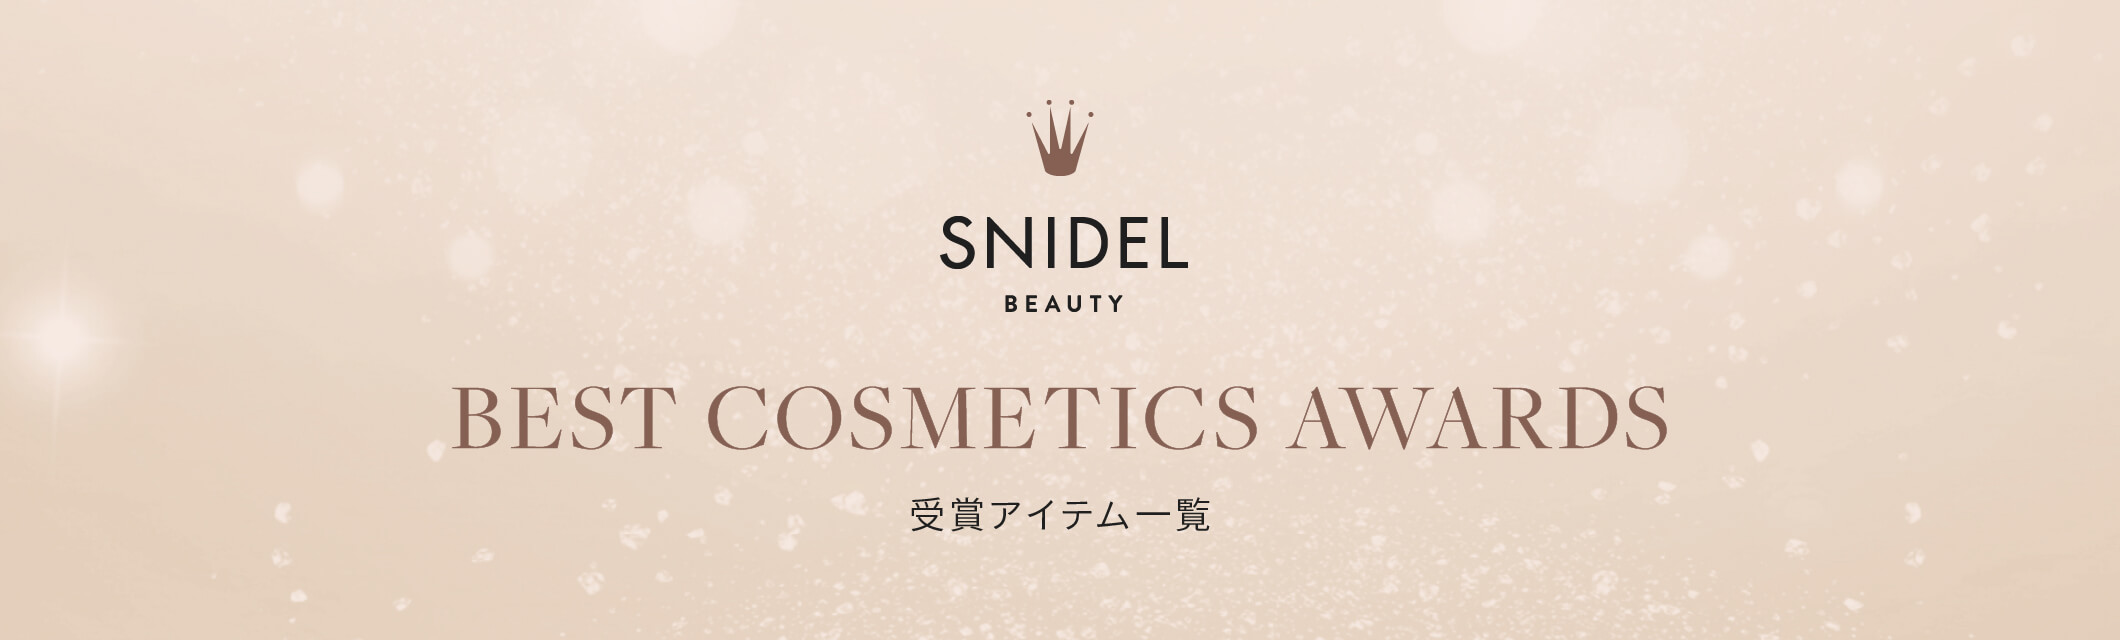 SNIDEL BEAUTY BEST COSMETICS AWARDS 受賞アイテム一覧